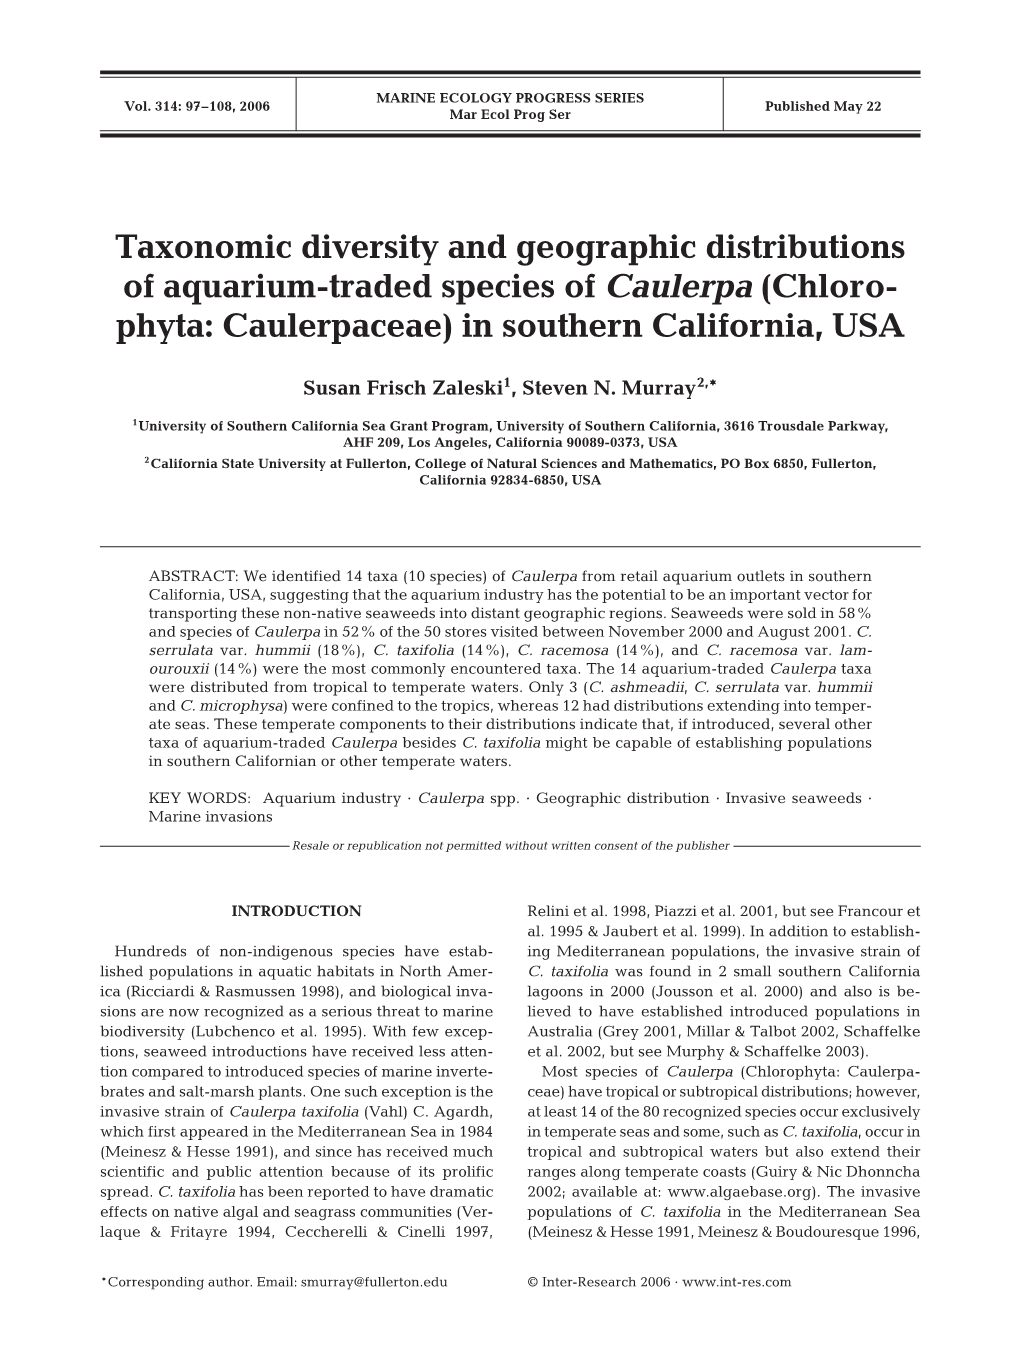 Taxonomic Diversity and Geographic Distributions of Aquarium-Traded Species of Caulerpa (Chloro- Phyta: Caulerpaceae) in Southern California, USA